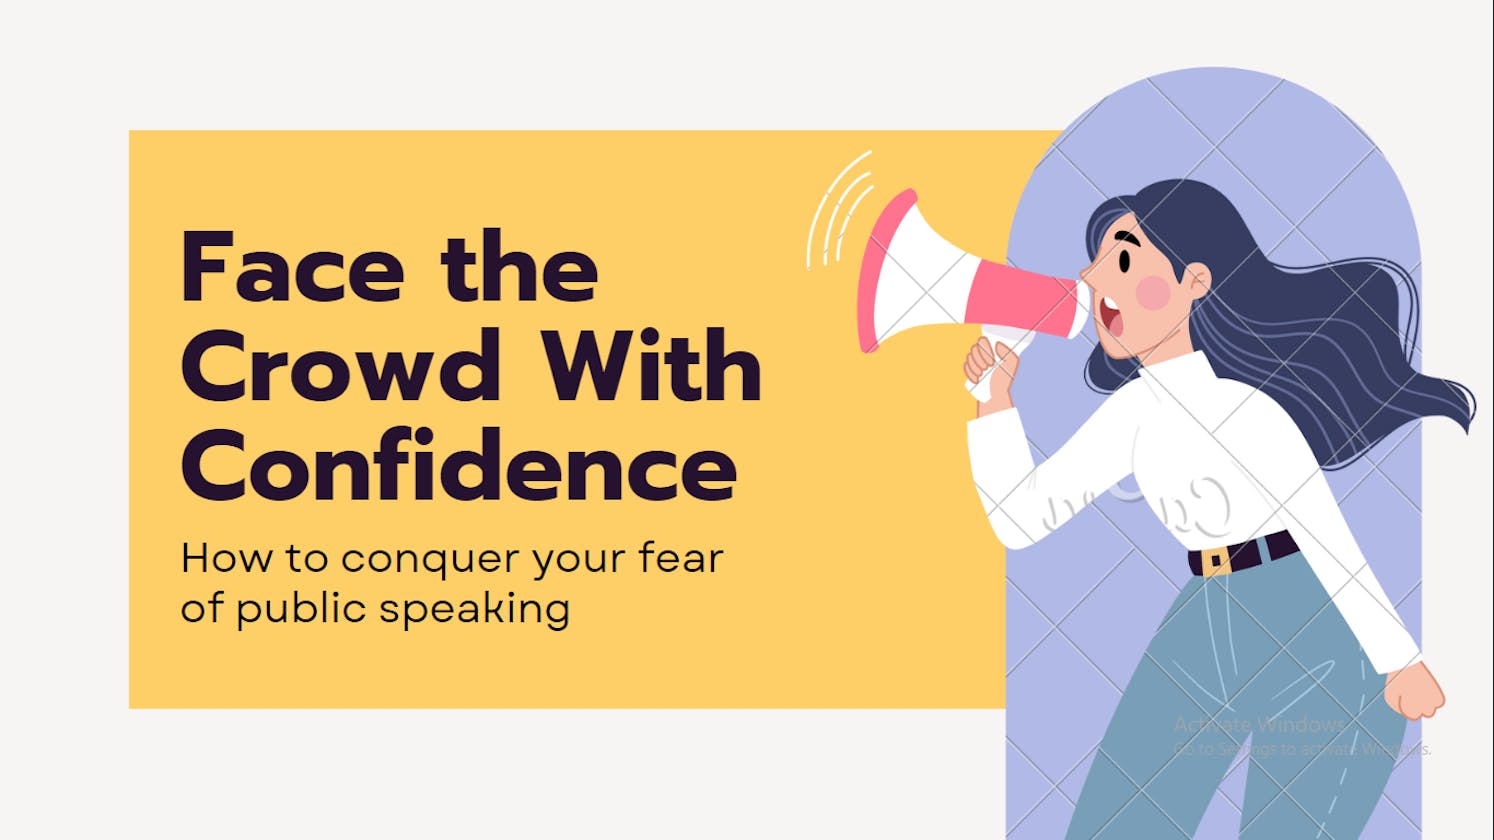 Developing Public Speaking Skills: A Introvert's Guide